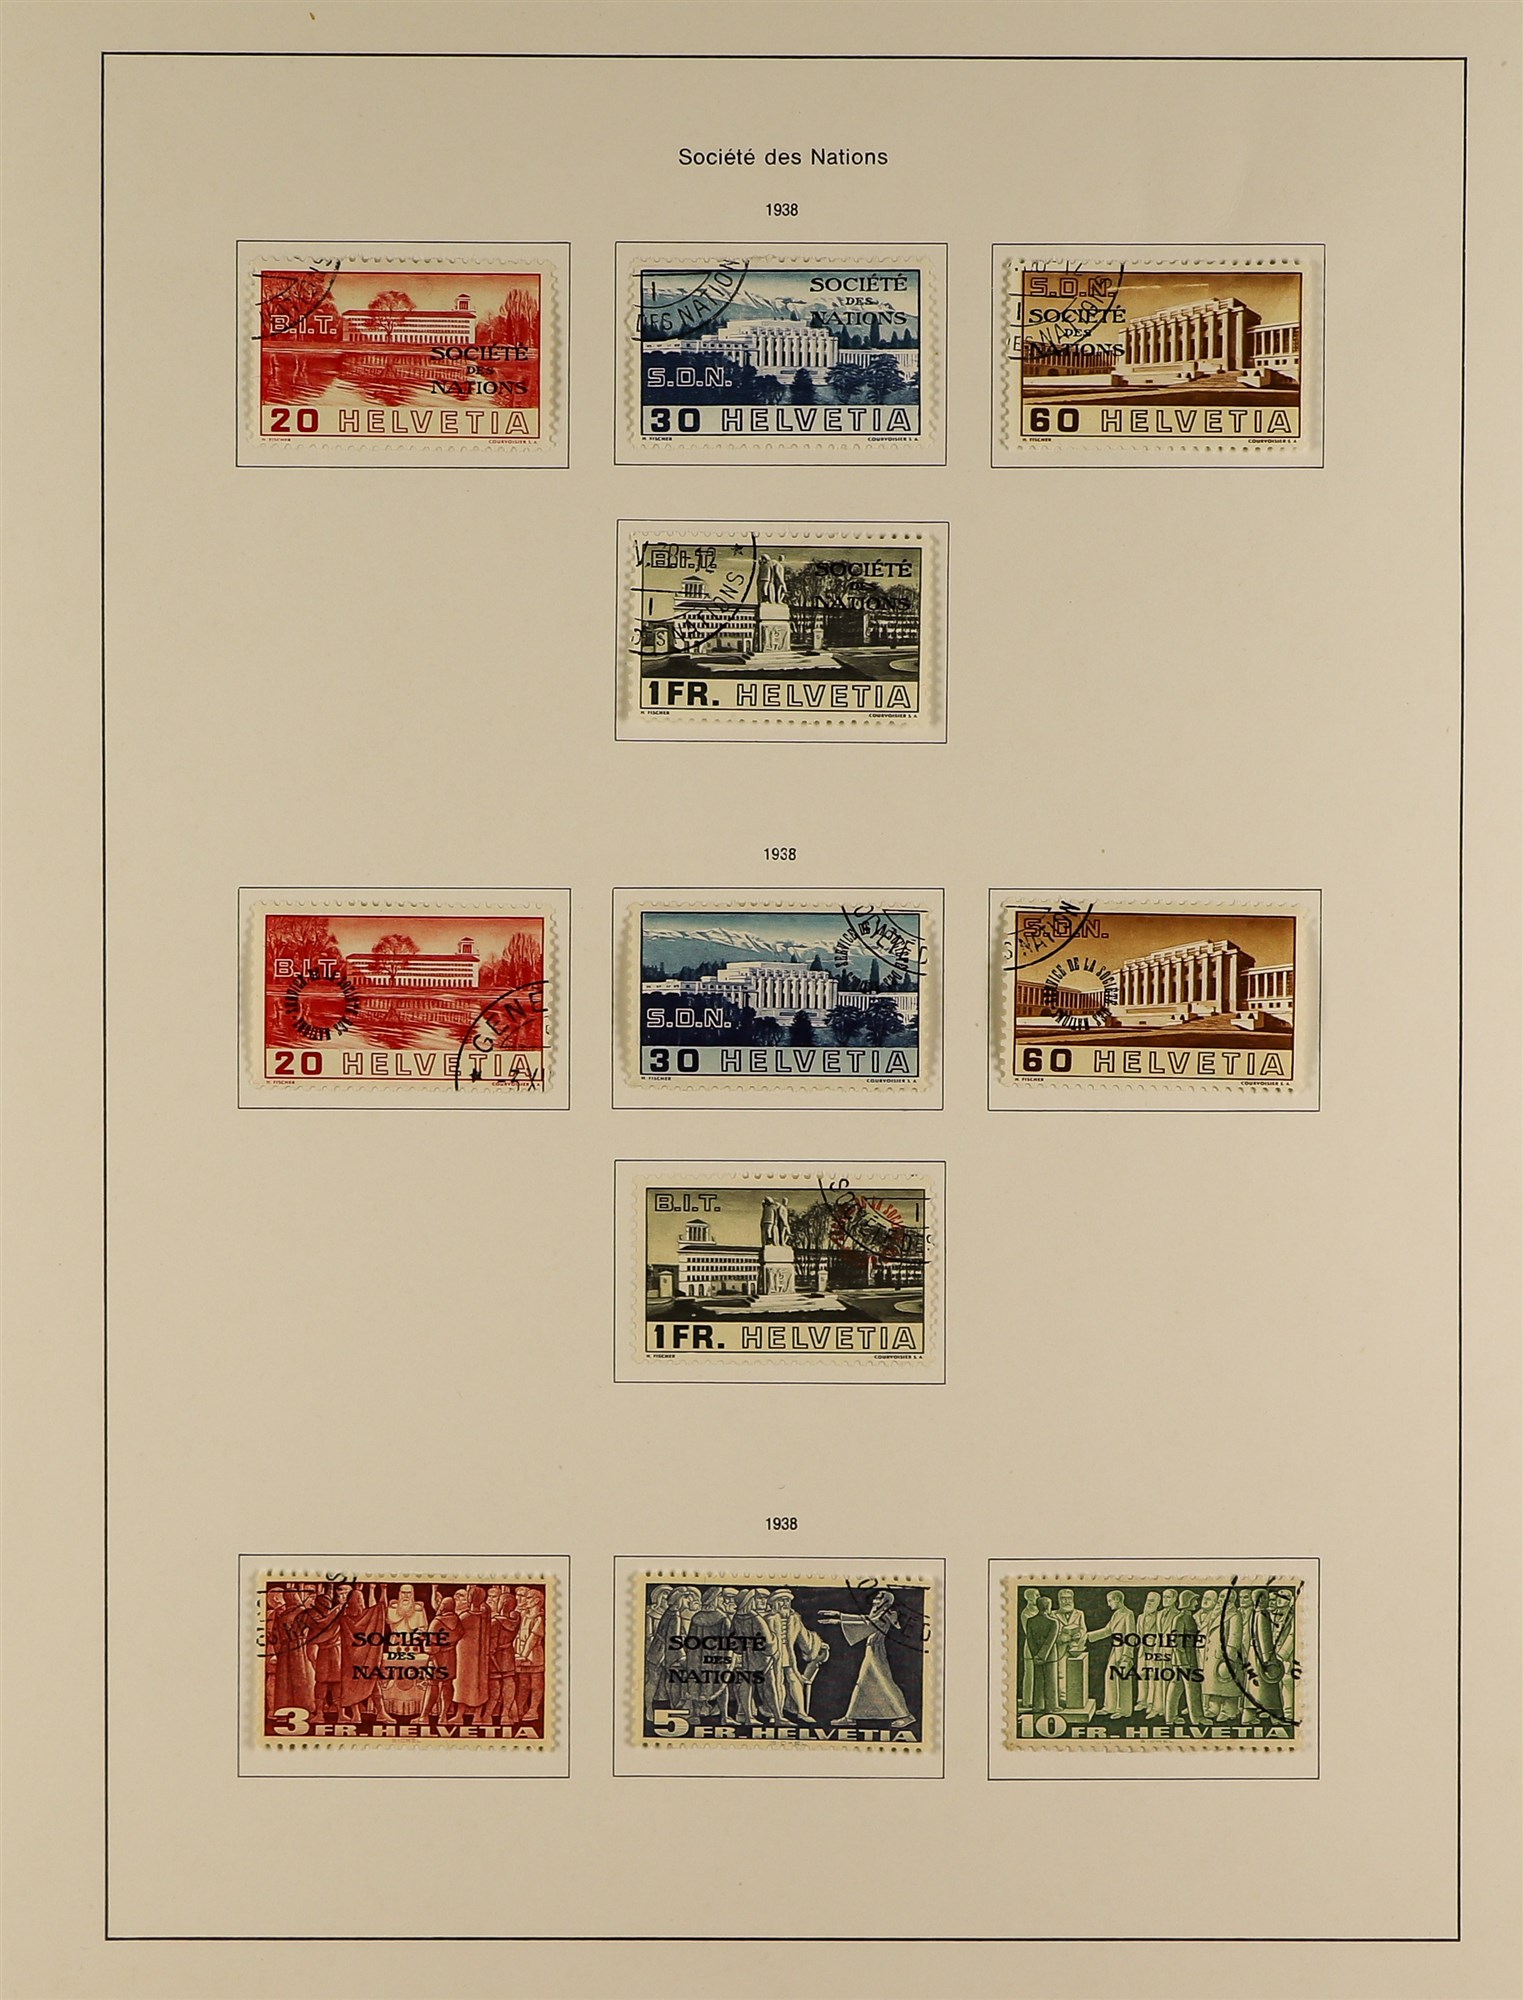 SWITZERLAND LEAGUE OF NATIONS 1922 - 1943 collection of 61 used stamps on album pages, note 1922- - Image 4 of 4